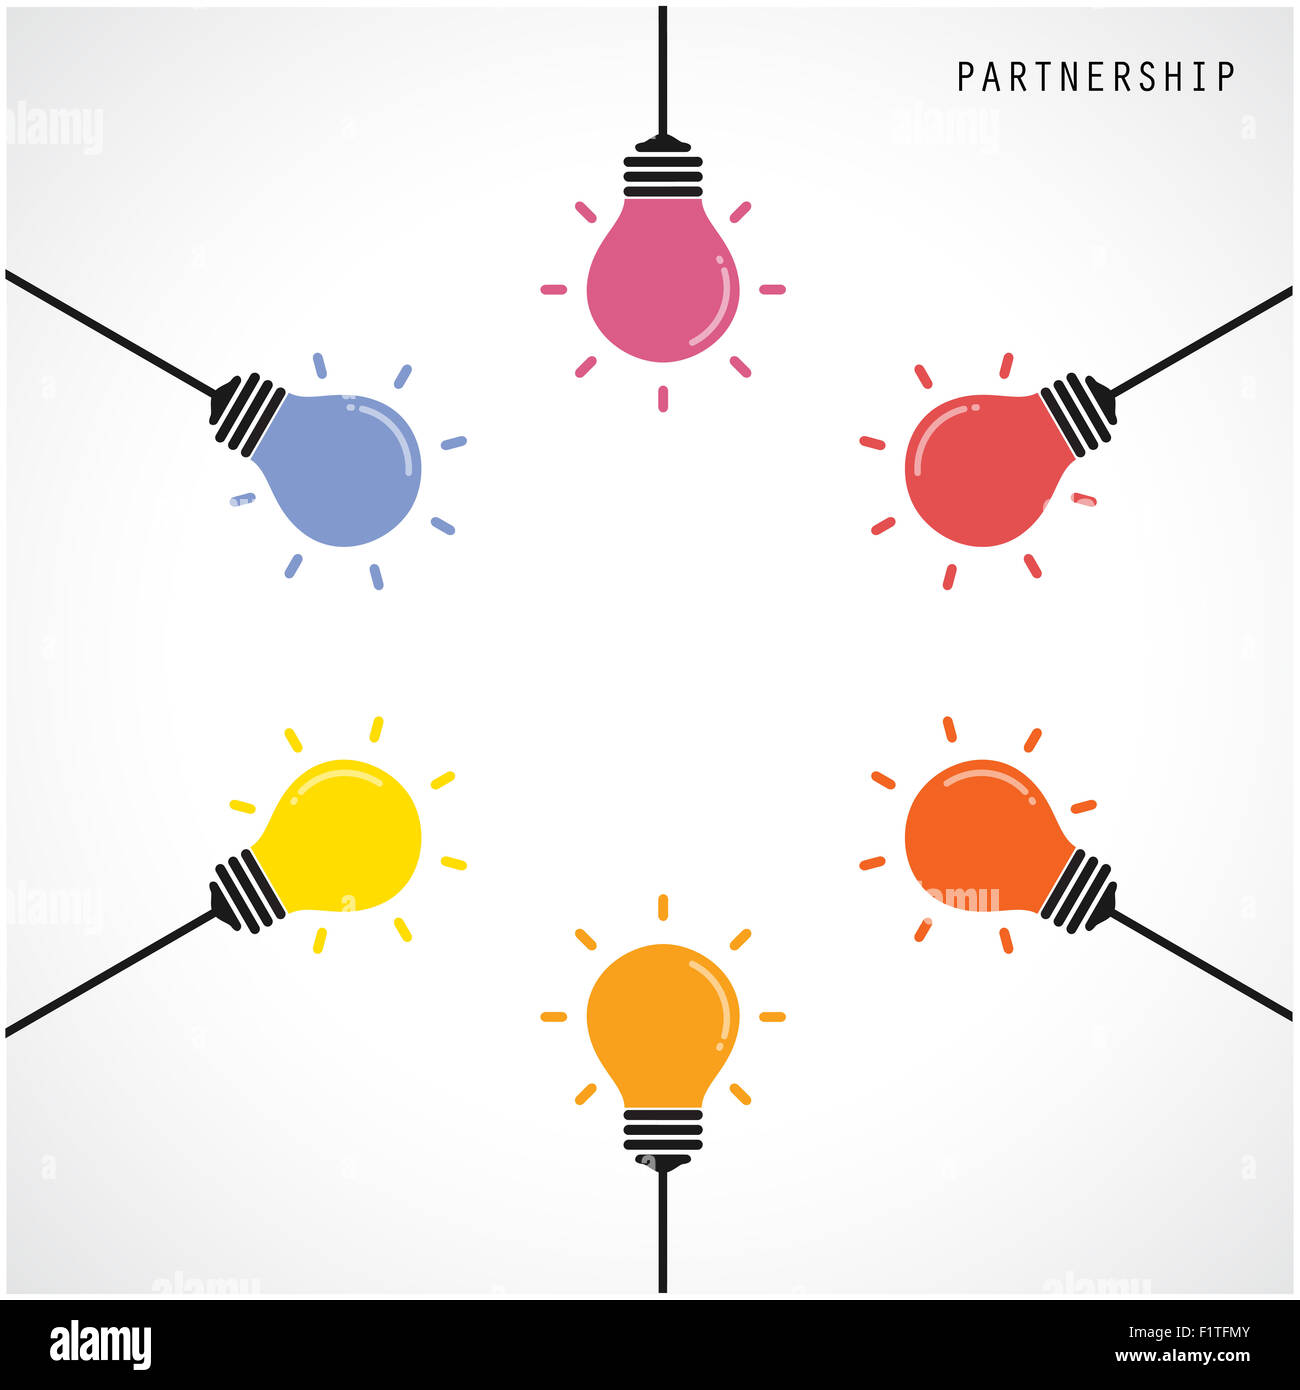 Creative light bulb Idea concept banner background. Brainstorming and teamwork concept . Stock Photo